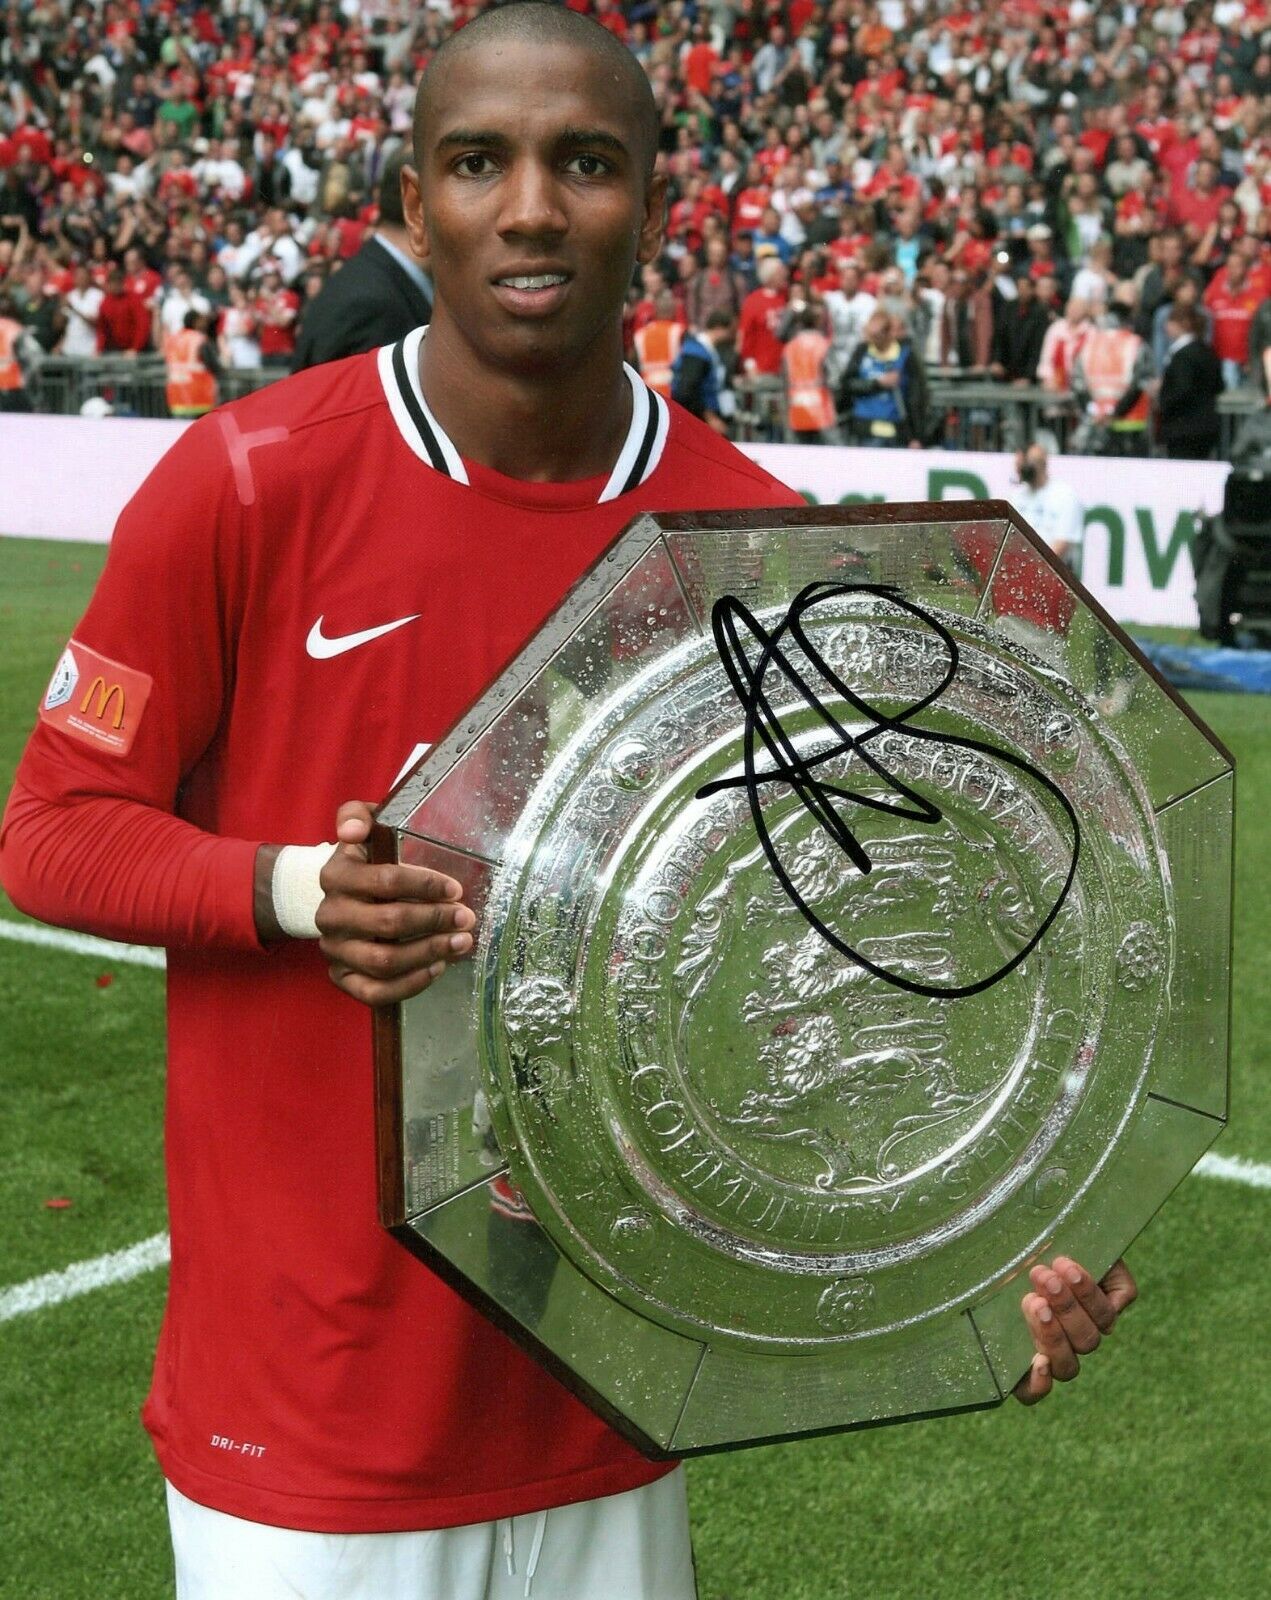 Manchester United Ashley Young Autographed Signed 8x10 Photo Coa #3